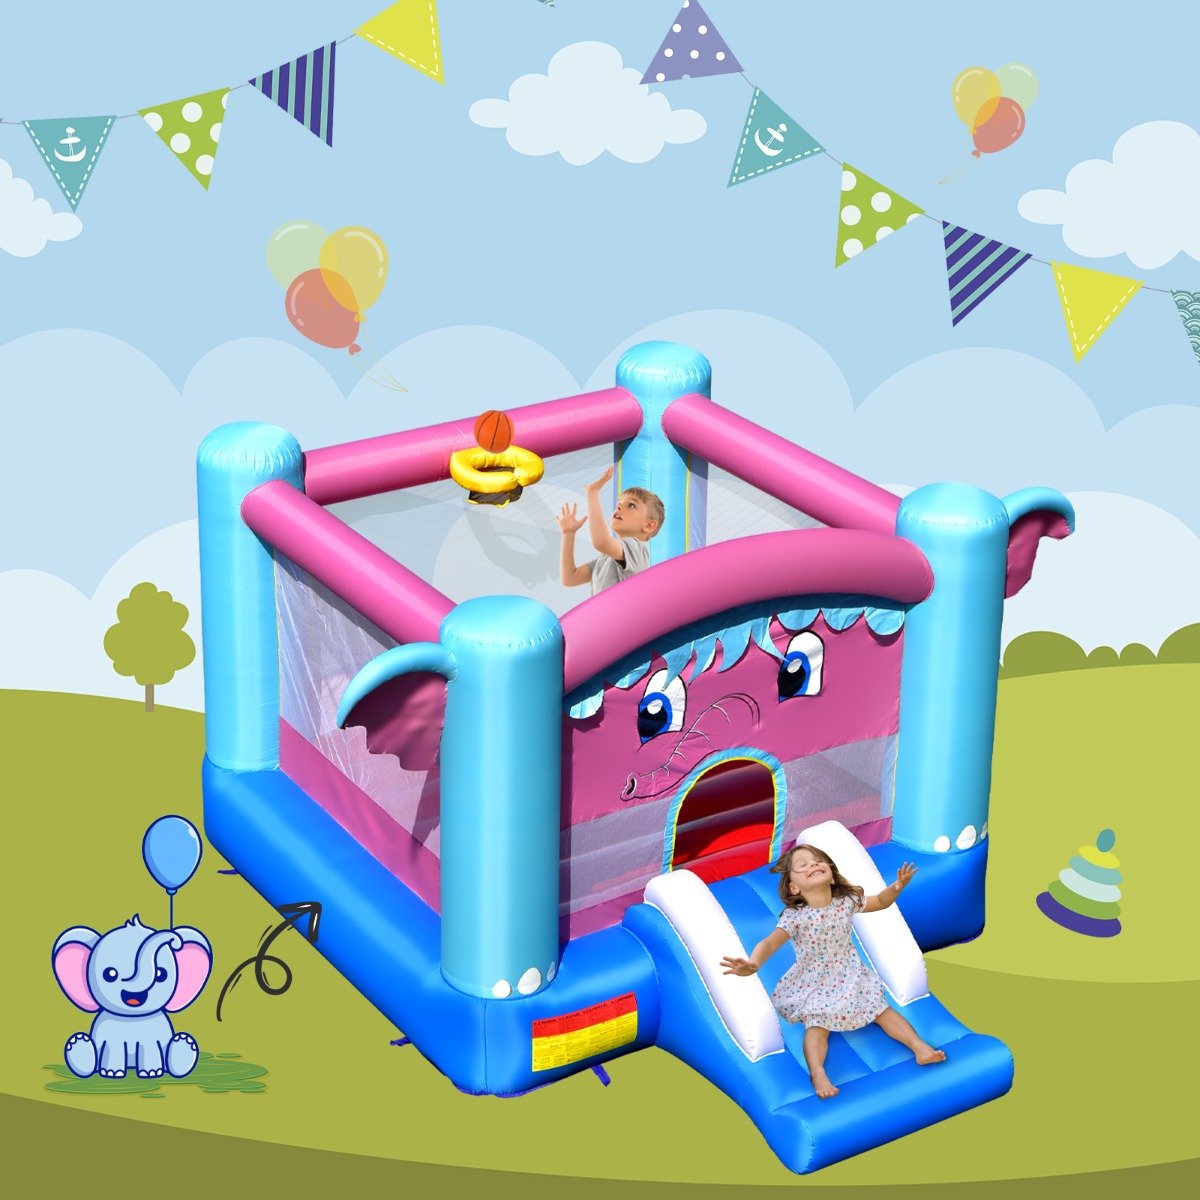 3-in-1 Inflatable Castle with Elephant Theme - Active Playtime Adventure